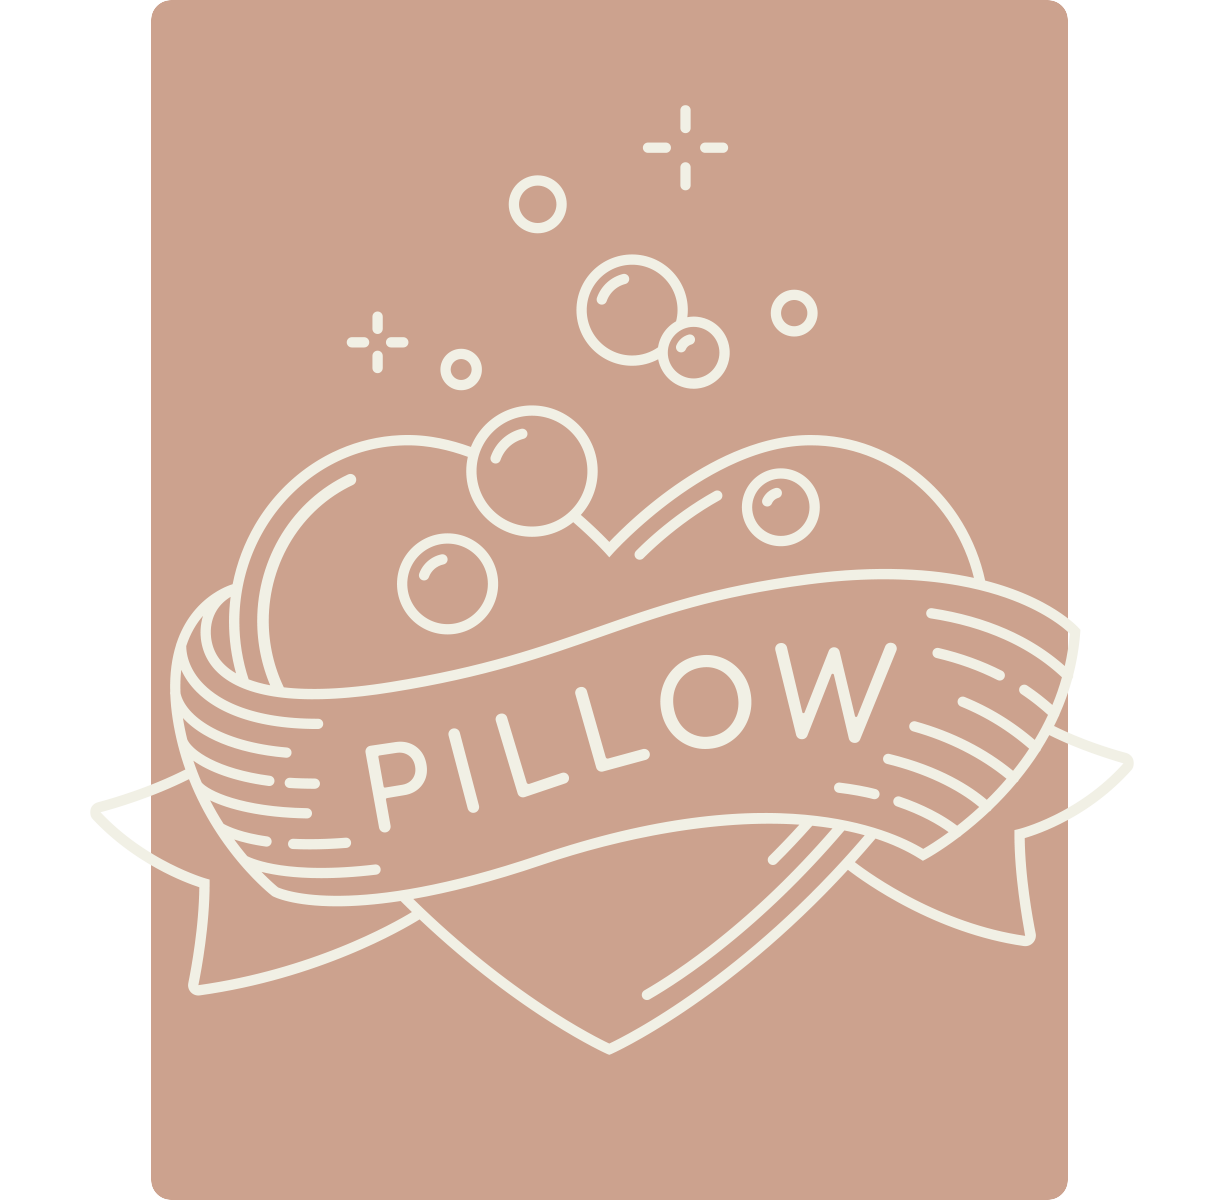 Whimsical illustration of a heart and soap bubbles showing a clean pillow